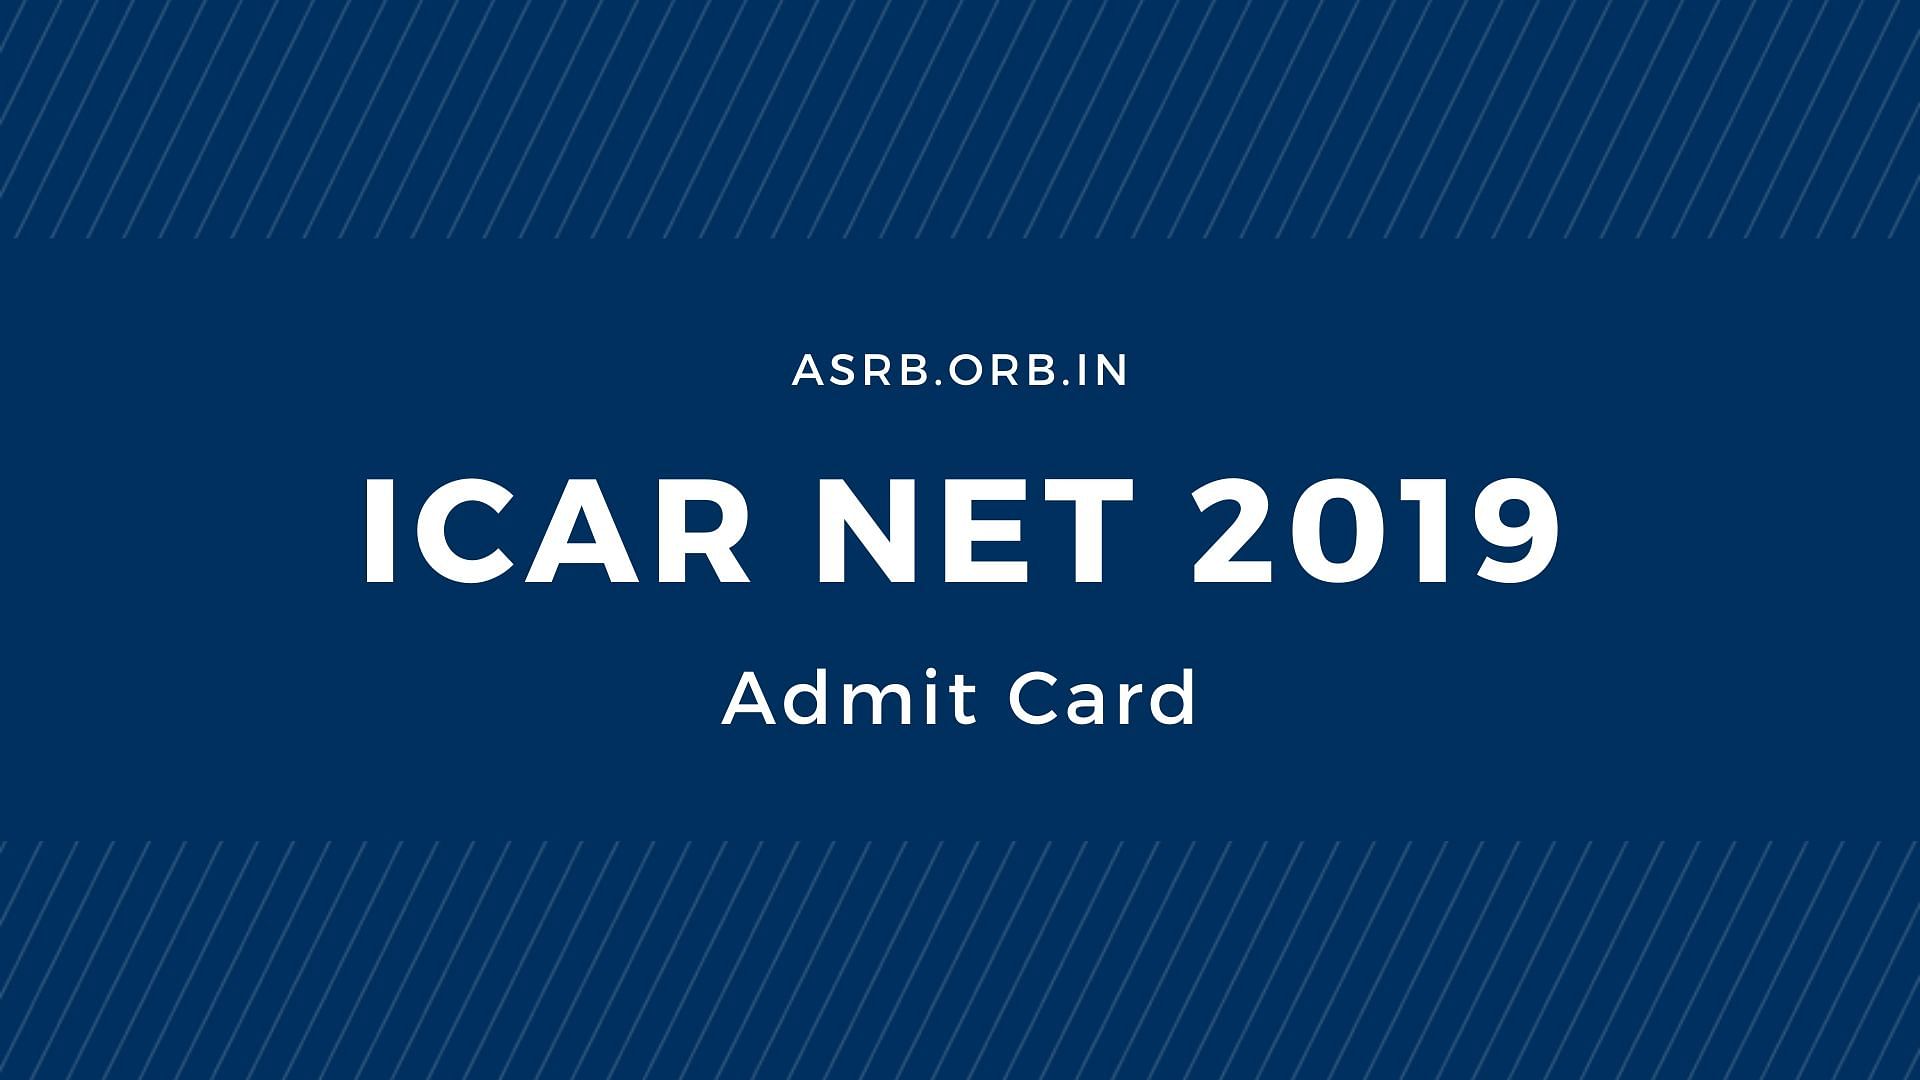 ICAR NET 2019 Admit Card and Exam Pattern